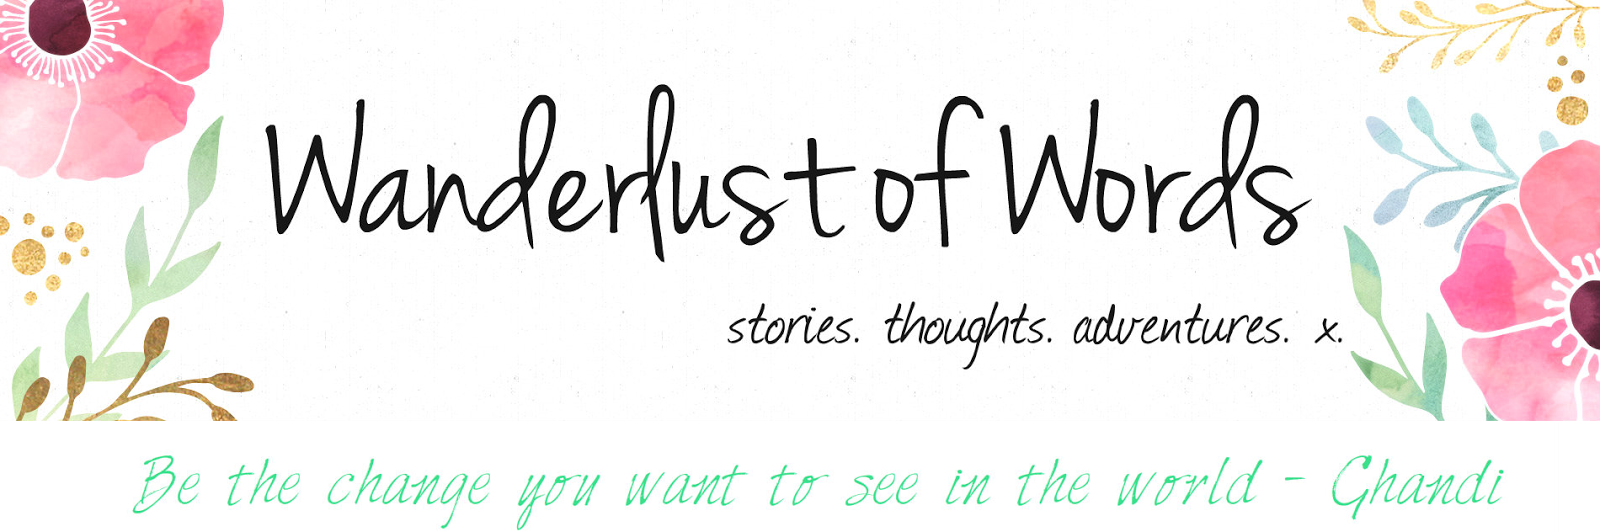 Wanderlust of Words | Lifestyle and Creative Writing Blog